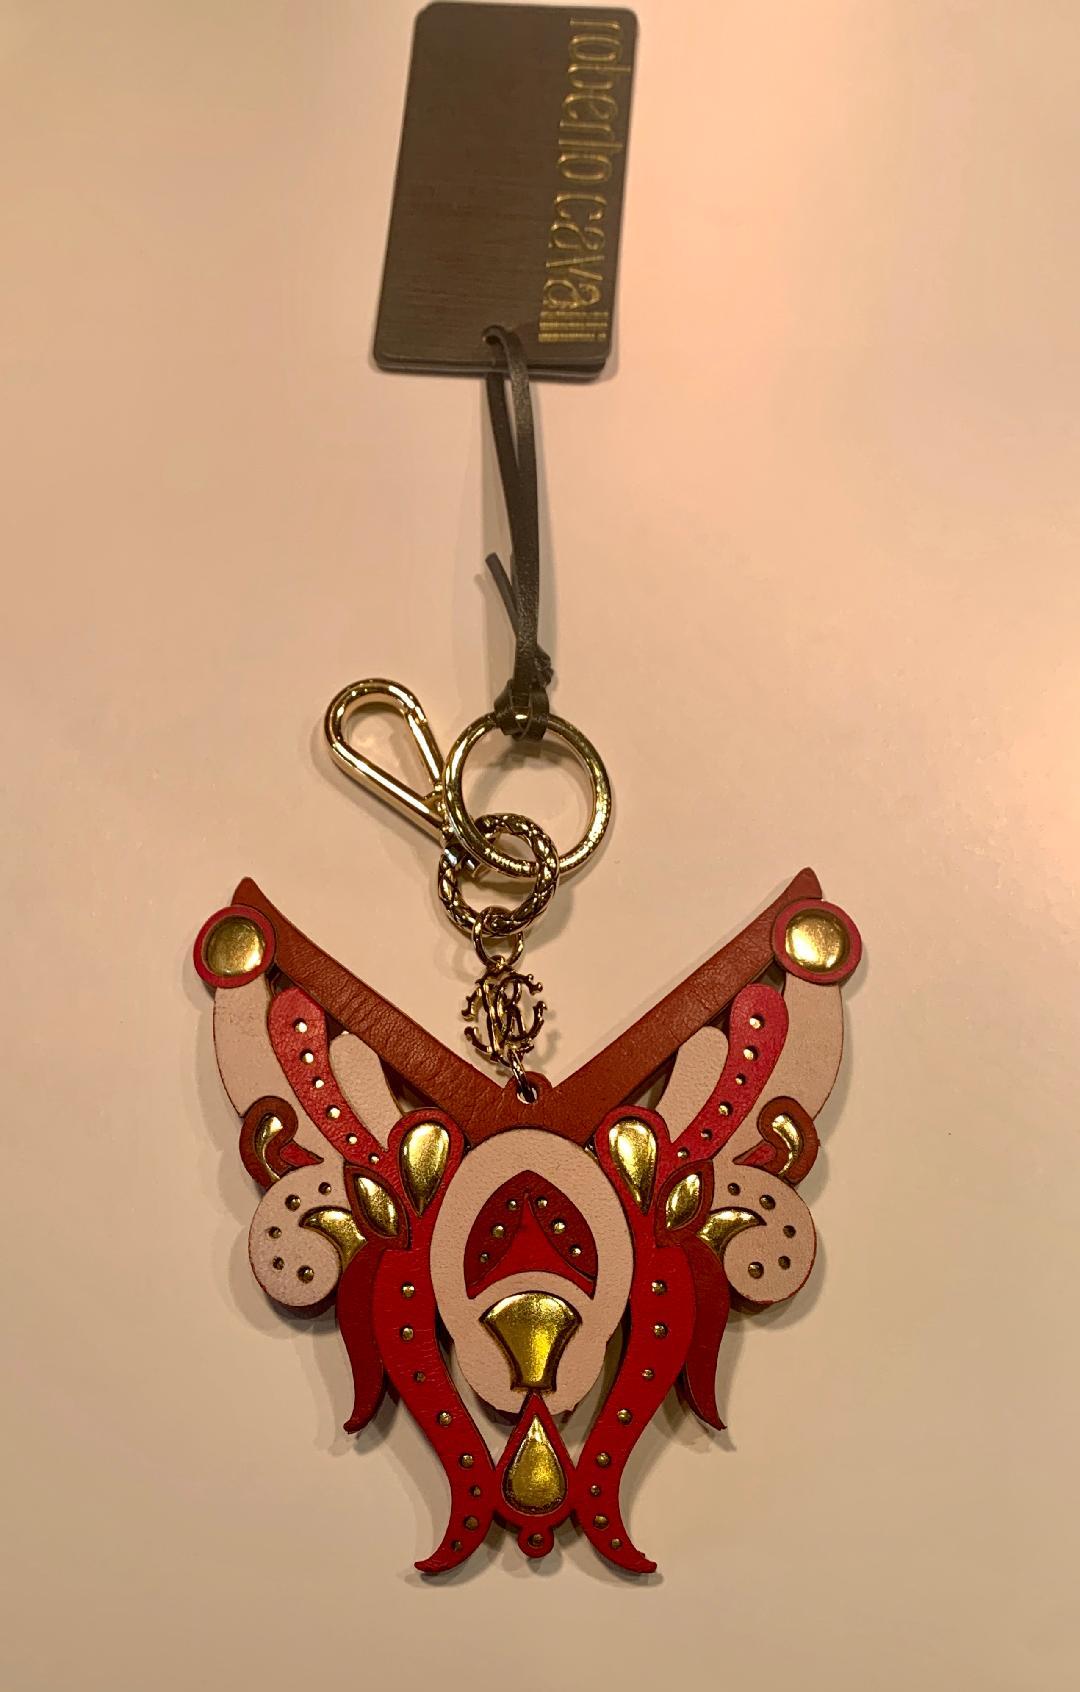 Striking and unusual, hand made in Italy, designer Roberto Cavalli, leather key holder, key chain, or purse charm in beautiful shades of pink and metallic gold.  Accent that special purse to make it stand out or just use it for your keys. Very